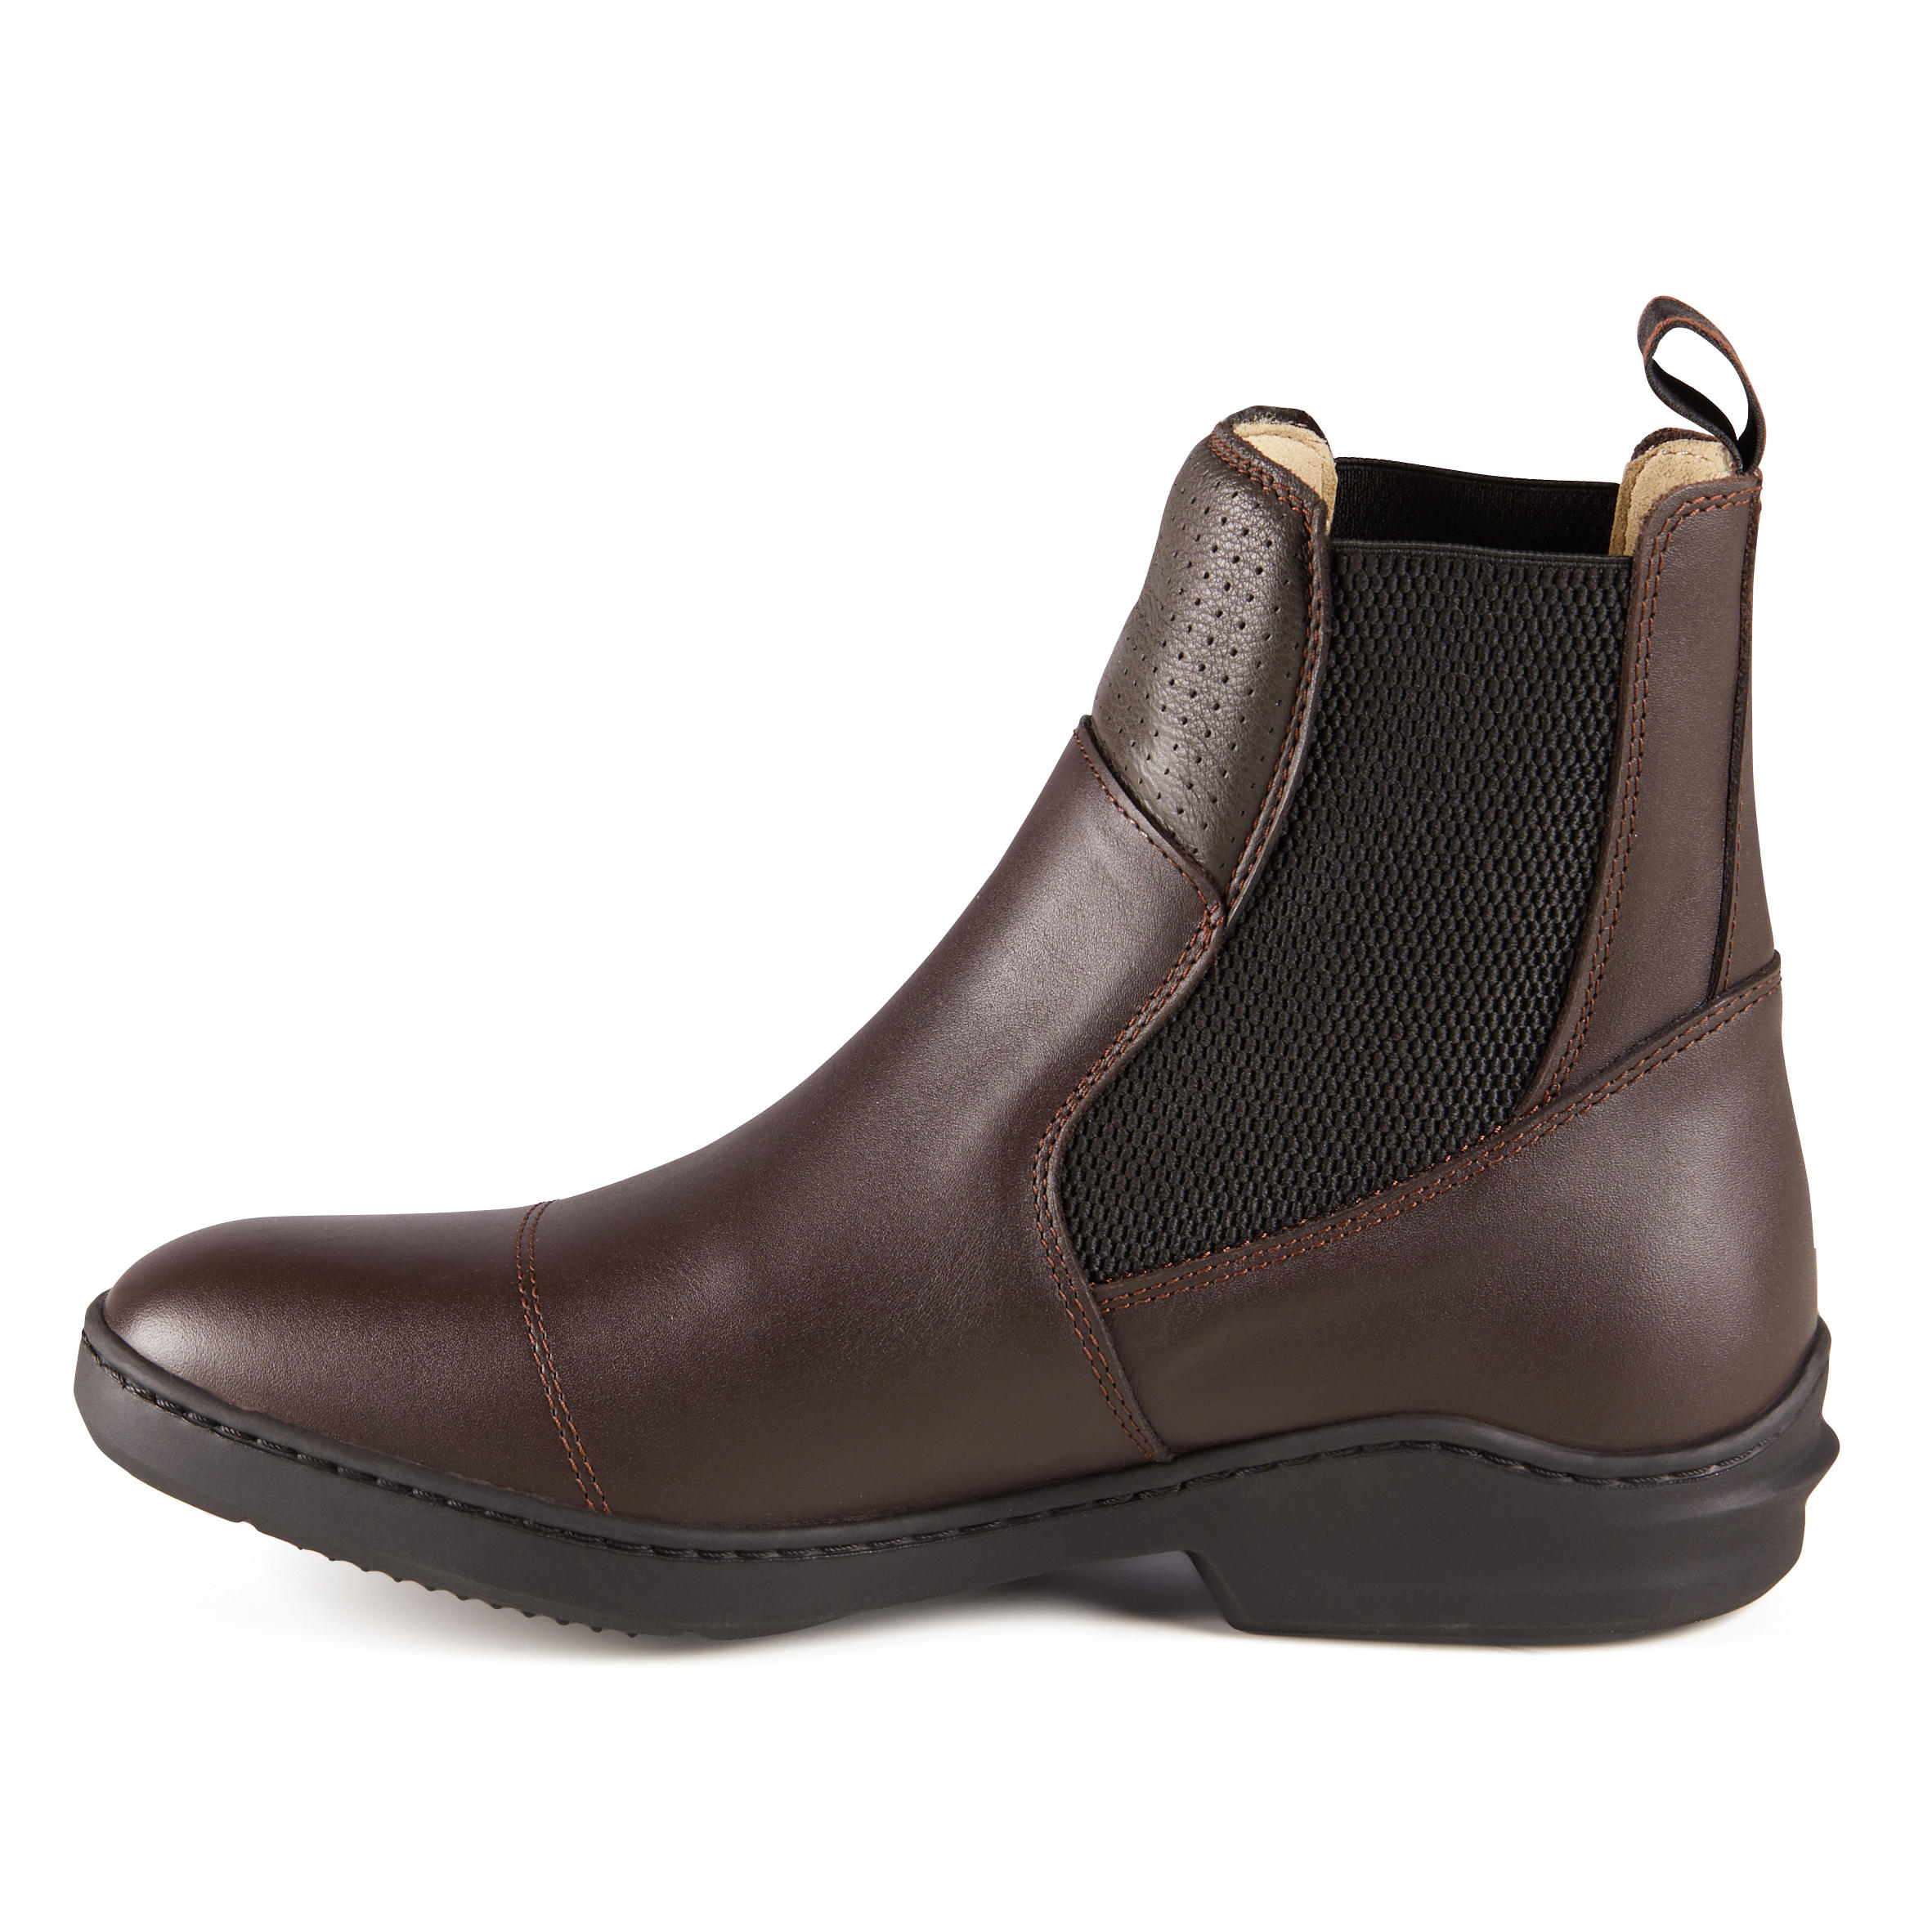 560 Adult Horse Riding Leather Jodhpur Boots - Brown 4/10